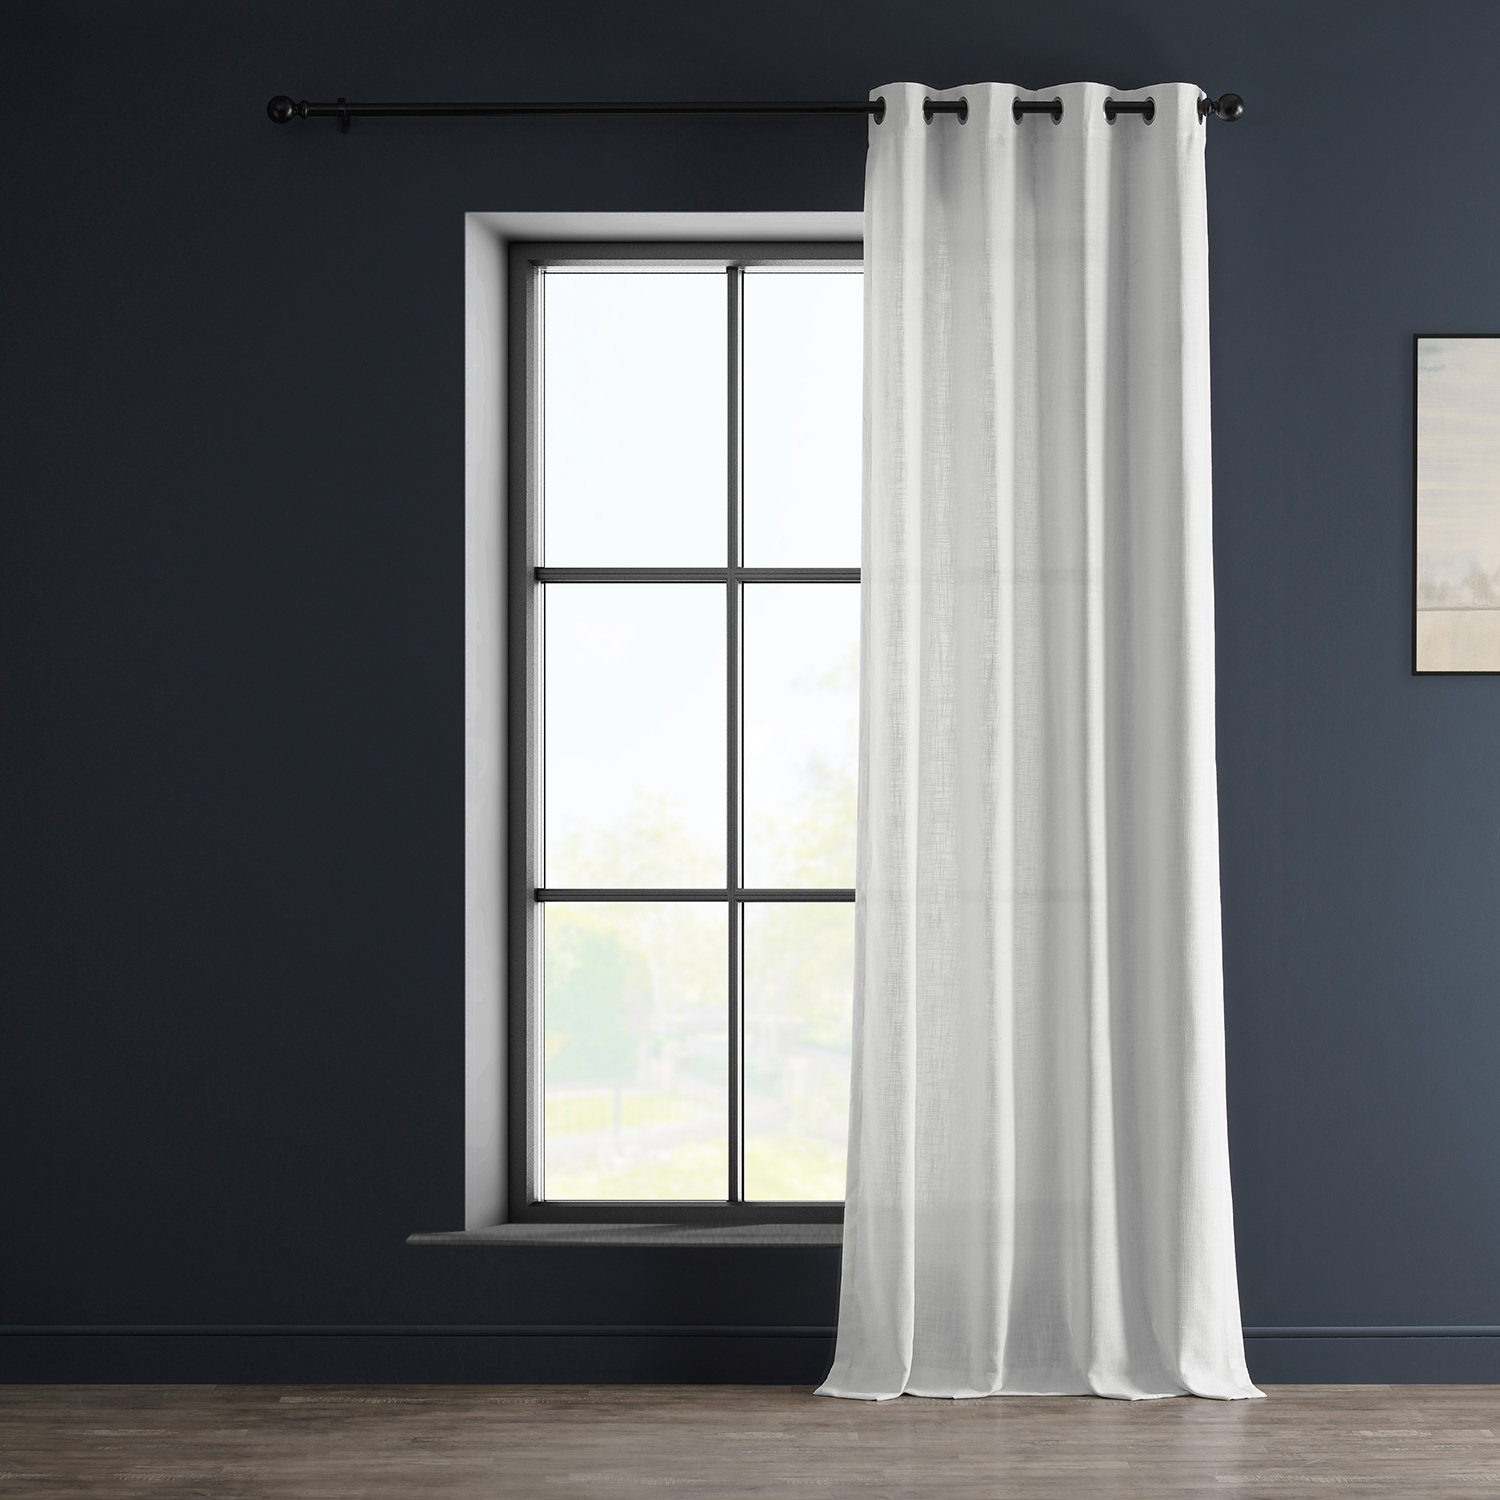 Semitransparent Balance Privacy & Light Vertical Flax Sheer Drapes, Semi  Sheer Linen Curtains - China Curtains and Blackout Curtains price